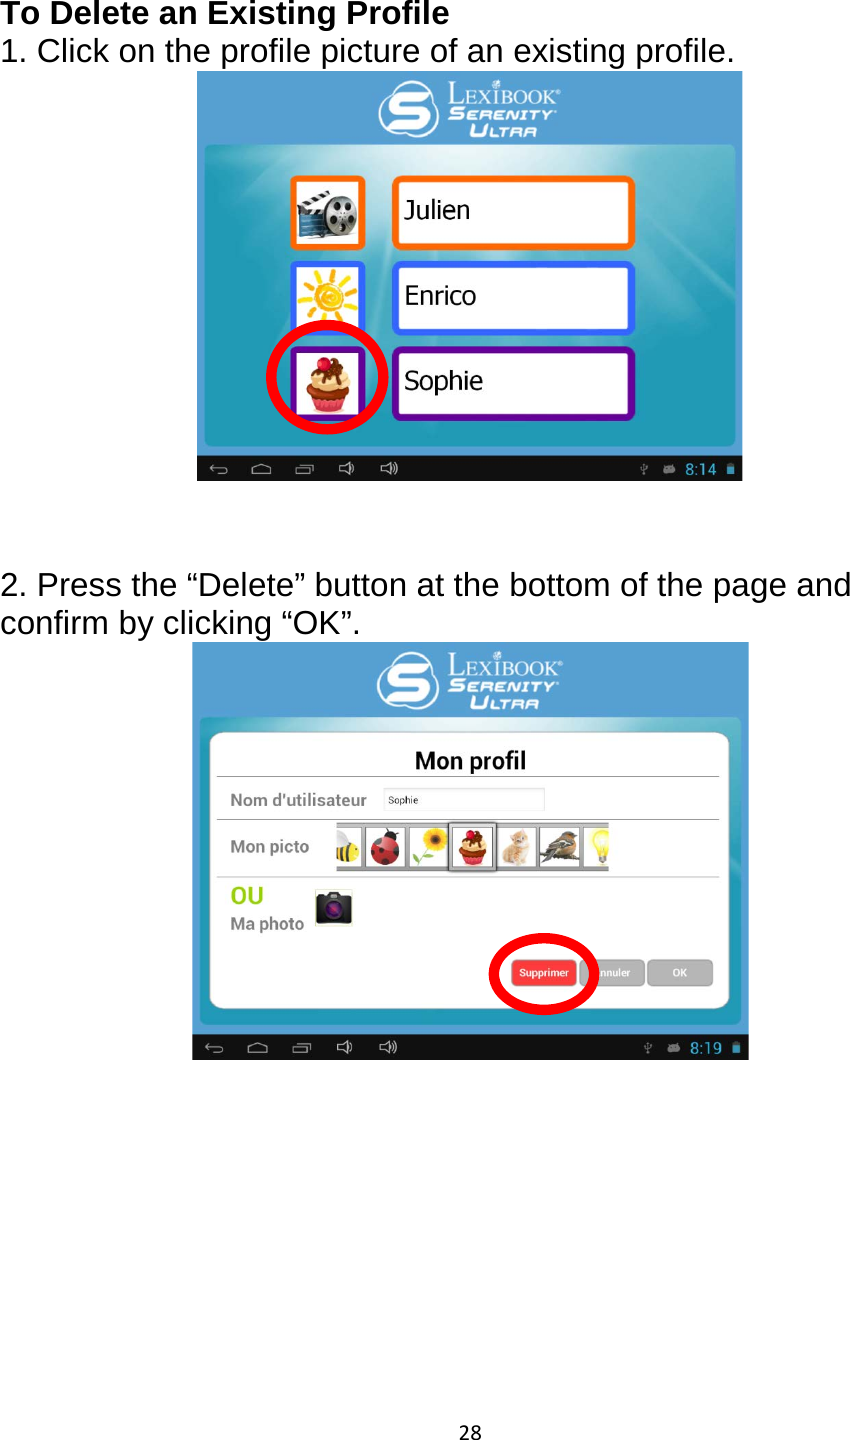 28  To Delete an Existing Profile 1. Click on the profile picture of an existing profile.    2. Press the “Delete” button at the bottom of the page and confirm by clicking “OK”.       